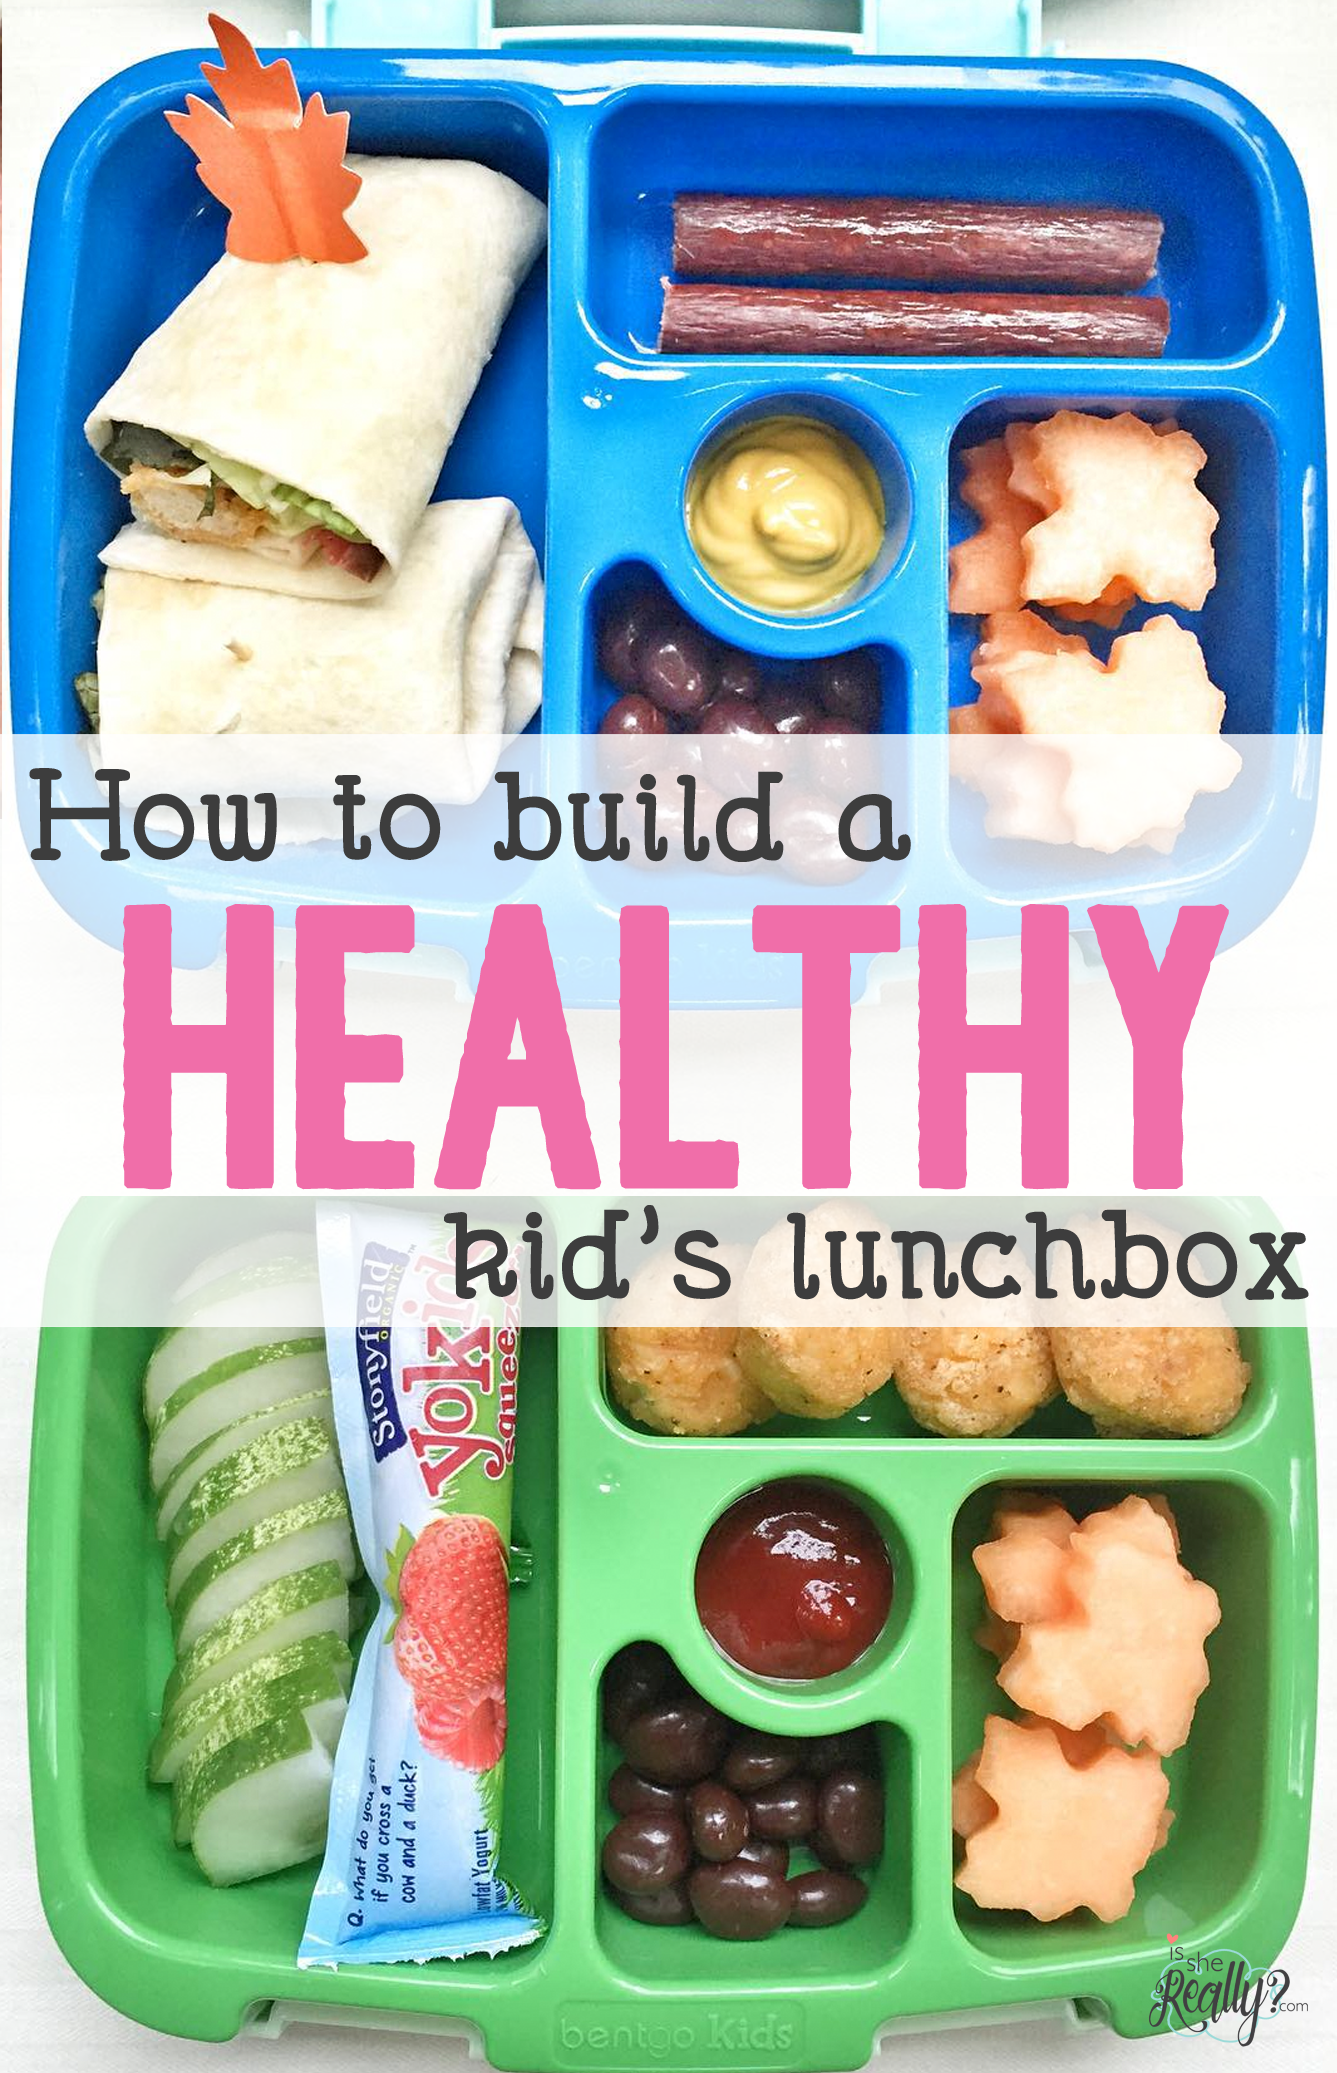 How to build a healthy kids lunchbox. #isshereally @ginaekirk